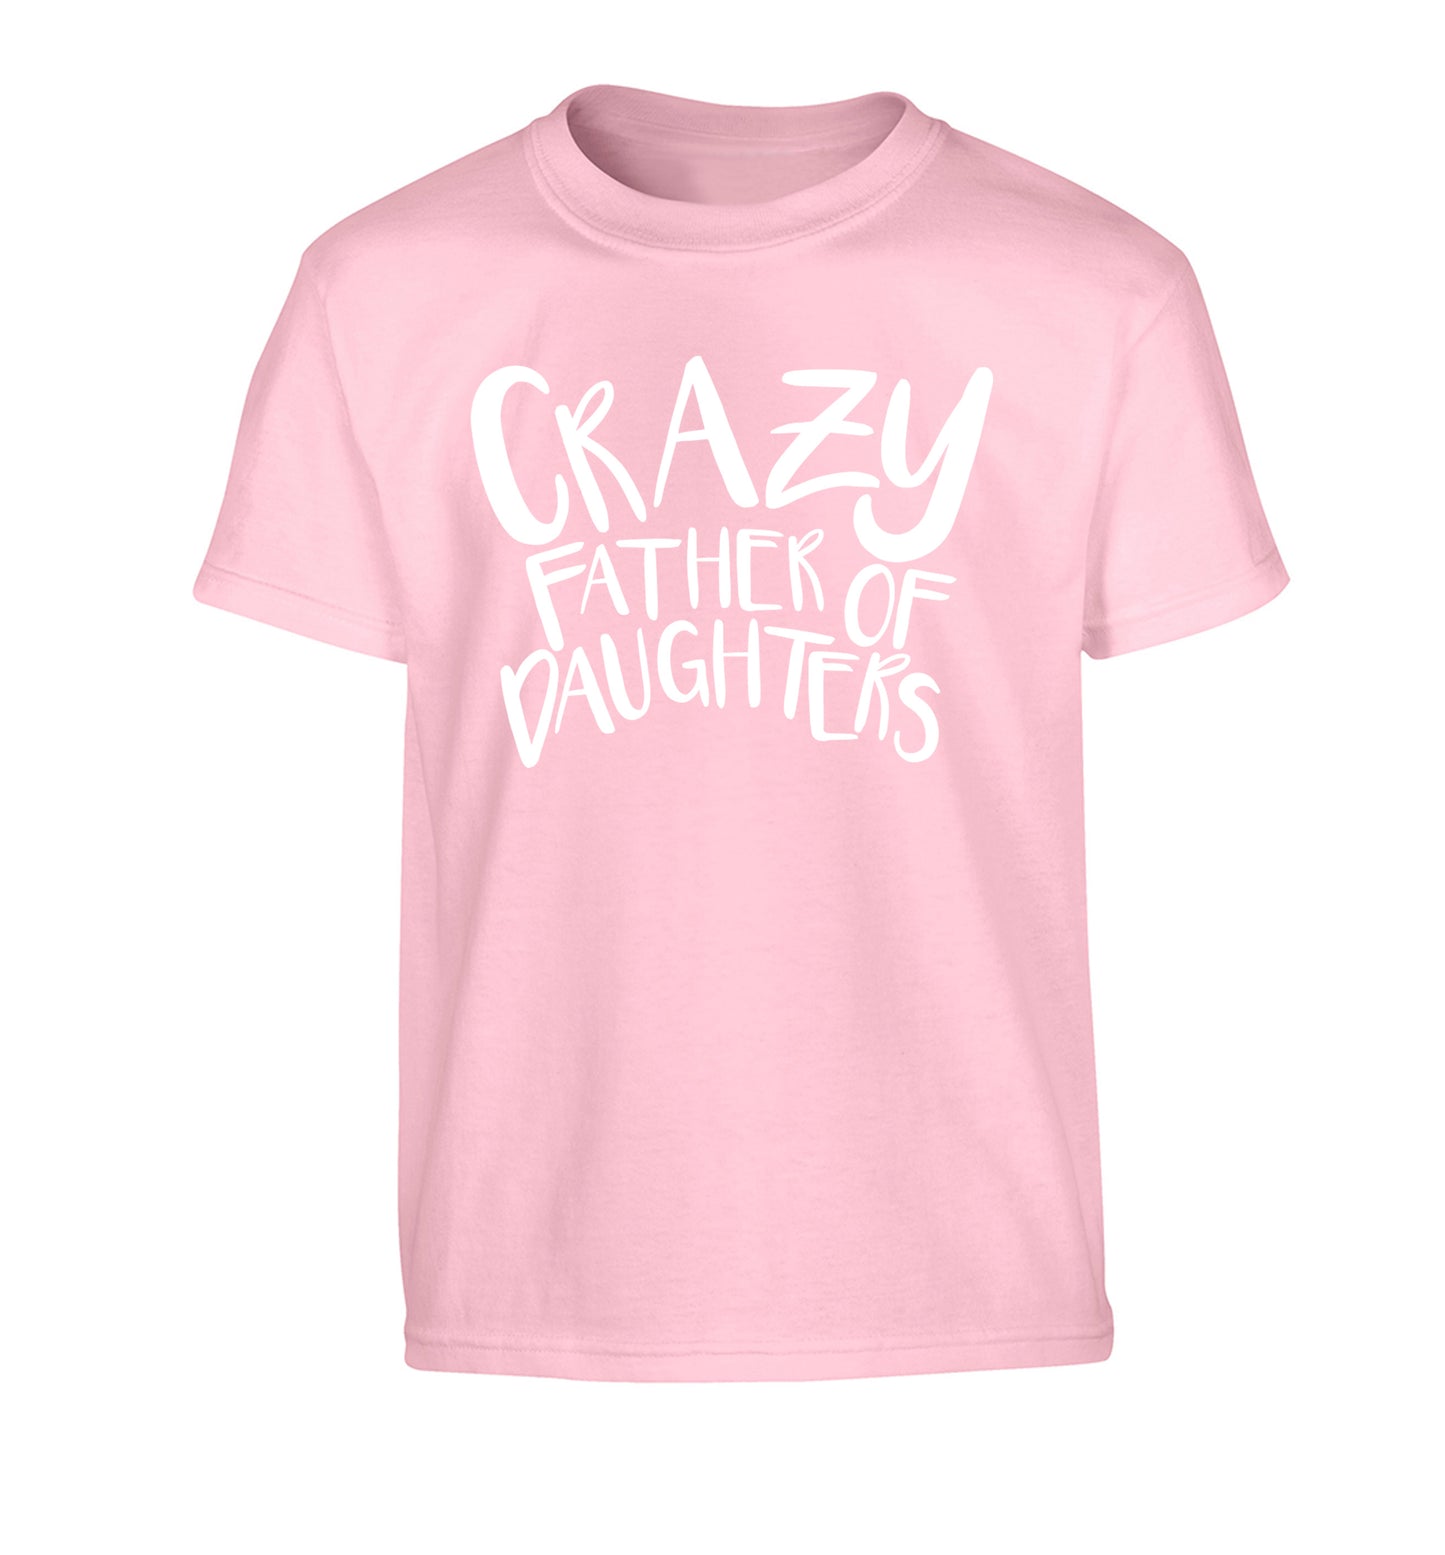 Crazy father of daughters Children's light pink Tshirt 12-13 Years